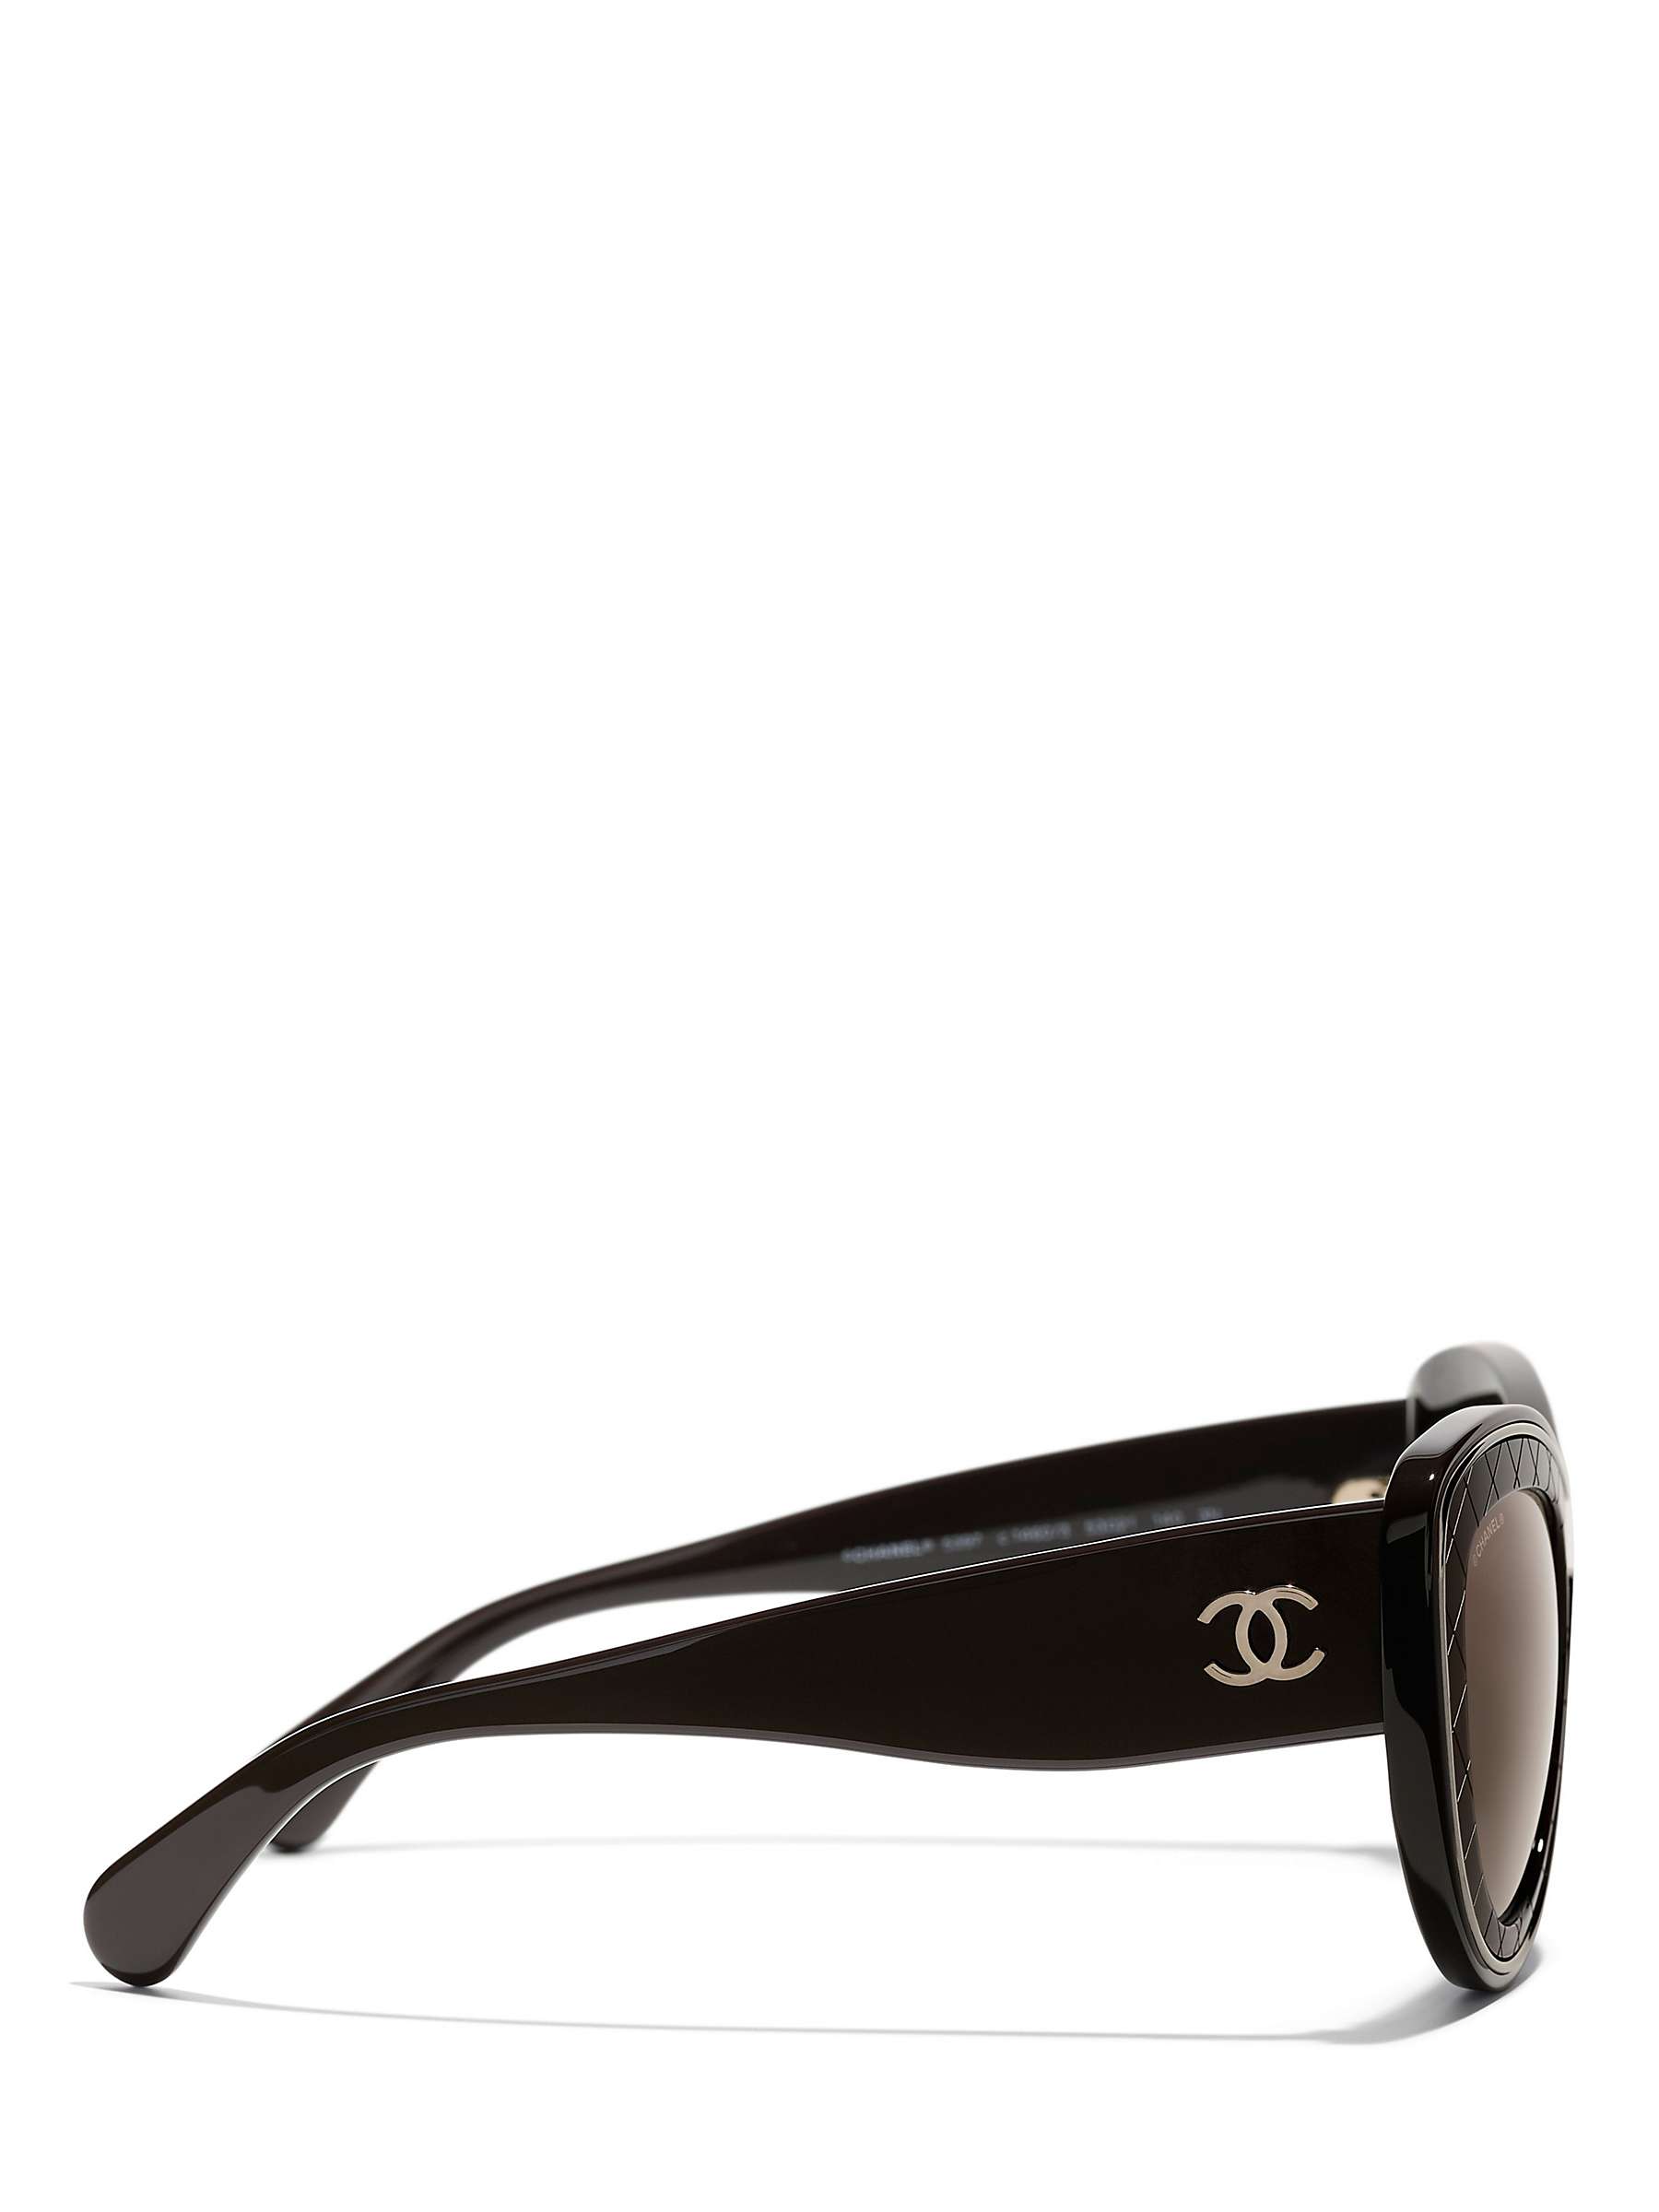 Buy CHANEL Butterfly Sunglasses CH5397 Brown/Brown Gradient Online at johnlewis.com